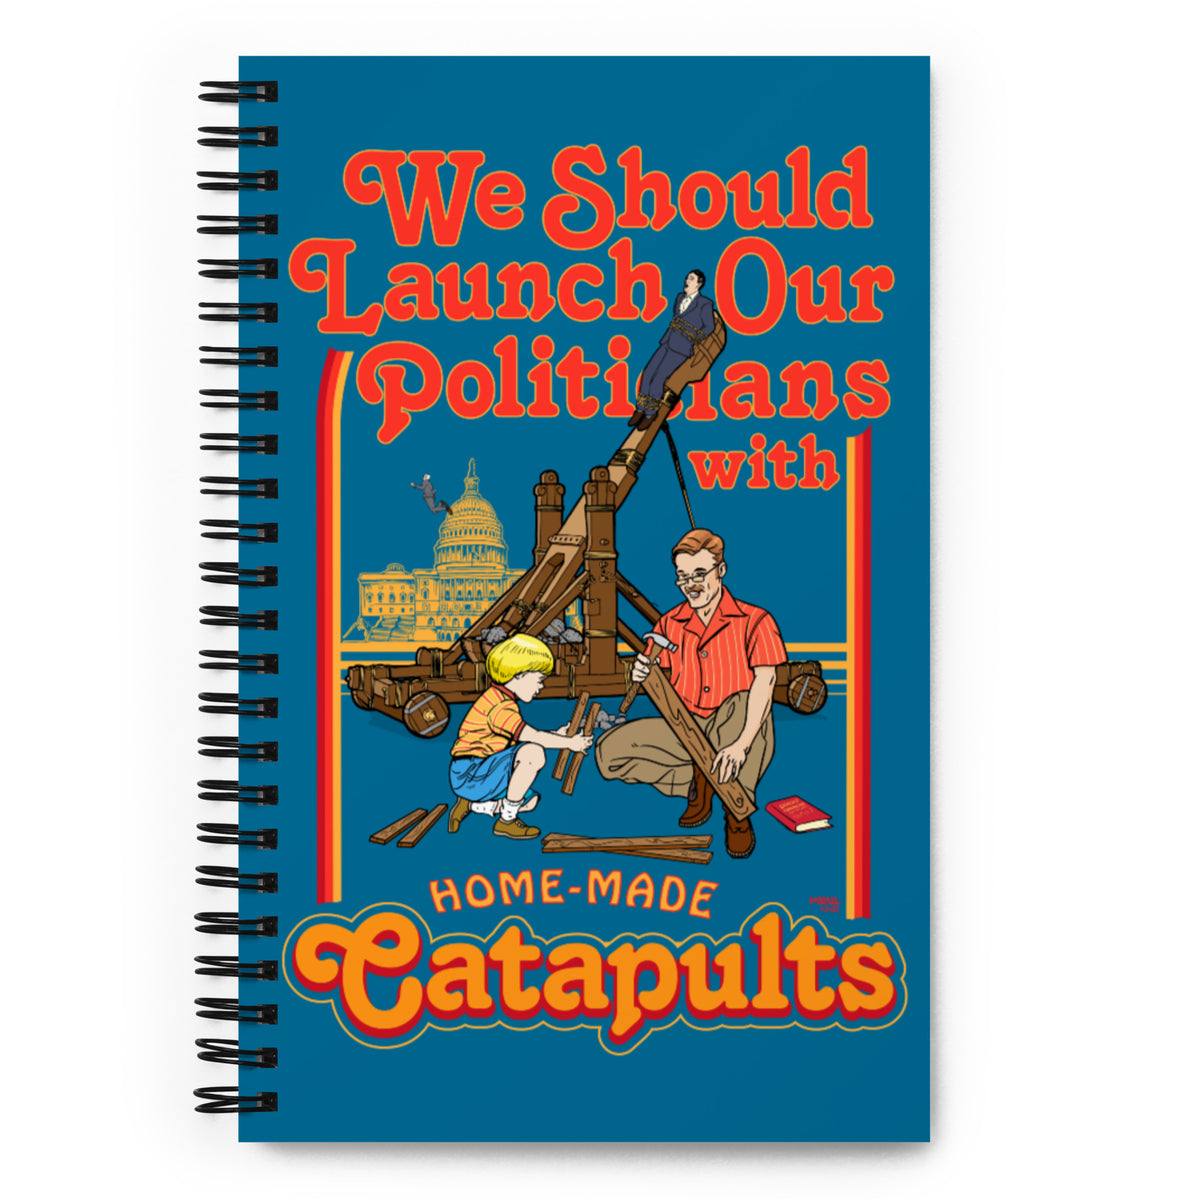 We Should Lauch Our Politicians from Homemade Catapults Spiral notebook